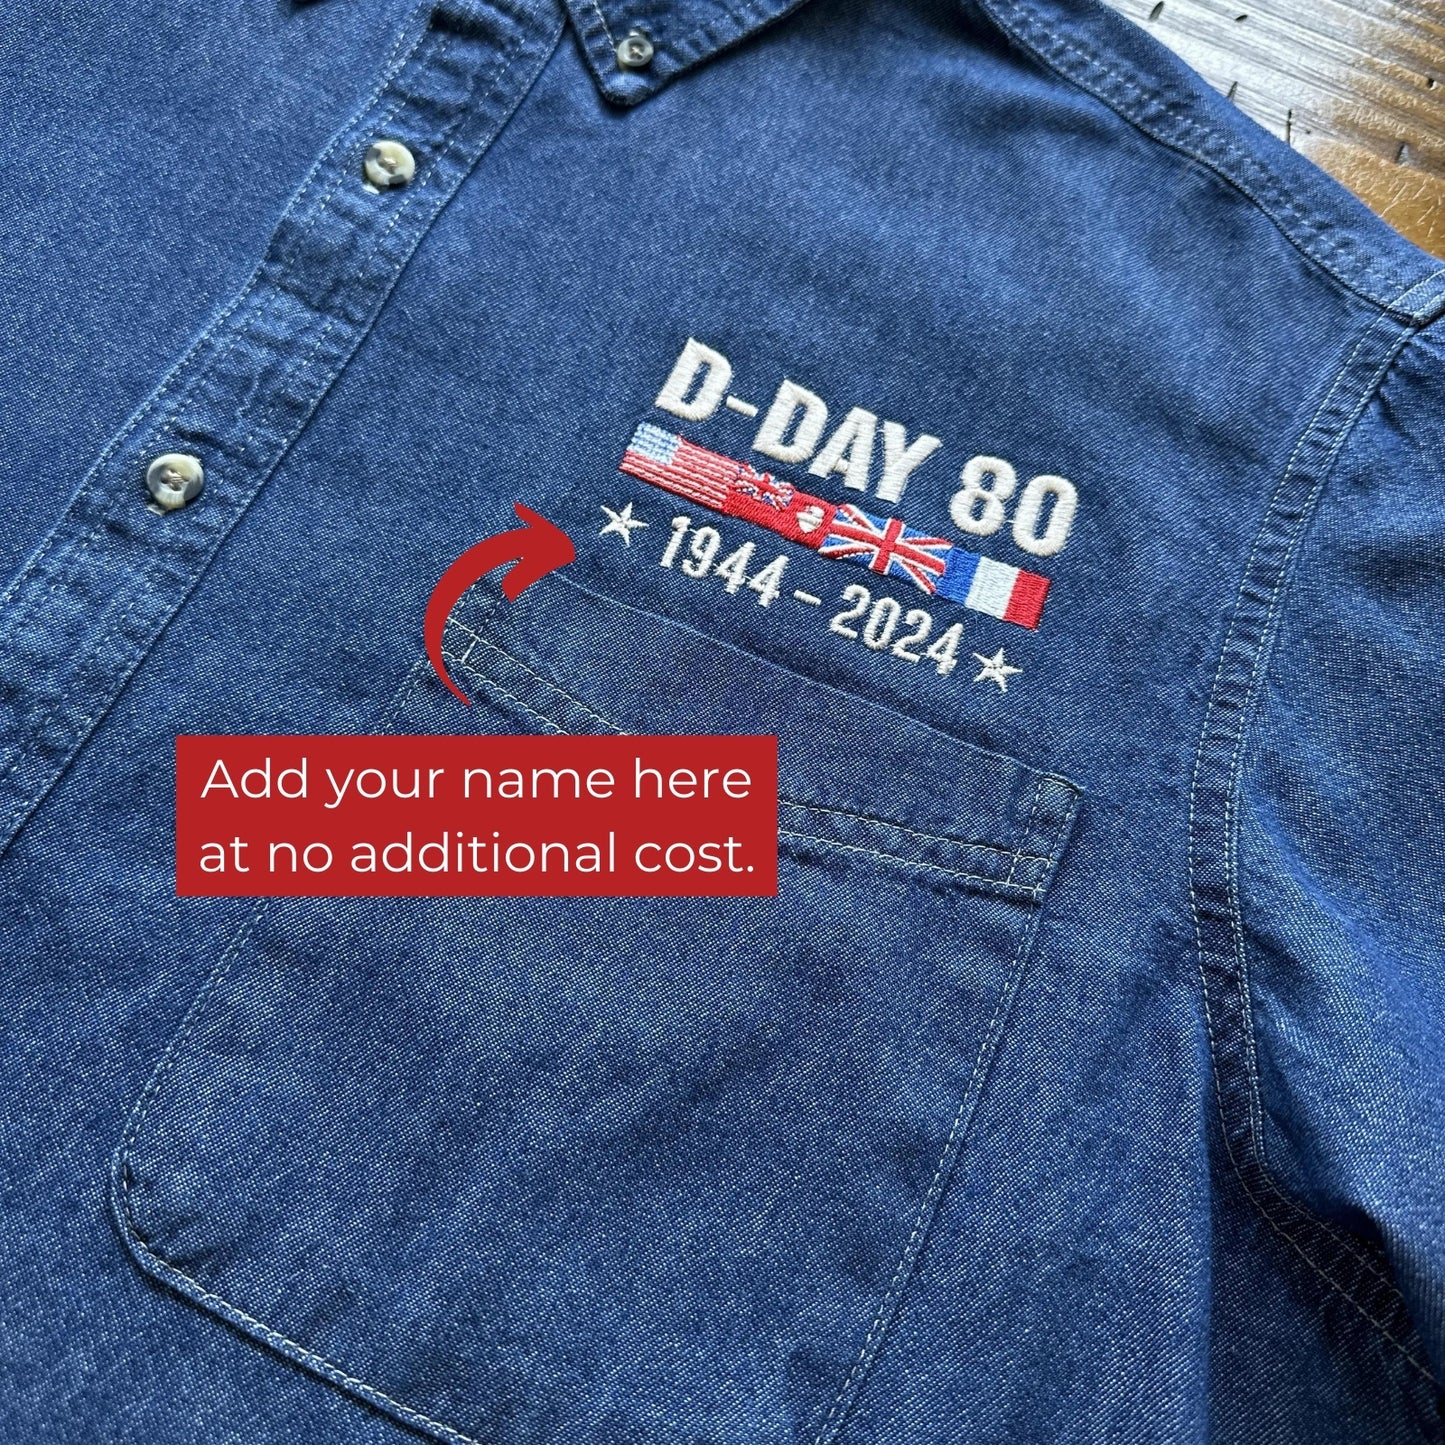 D-Day 80th Anniversary embroidered long sleeve button down shirt with free personalization